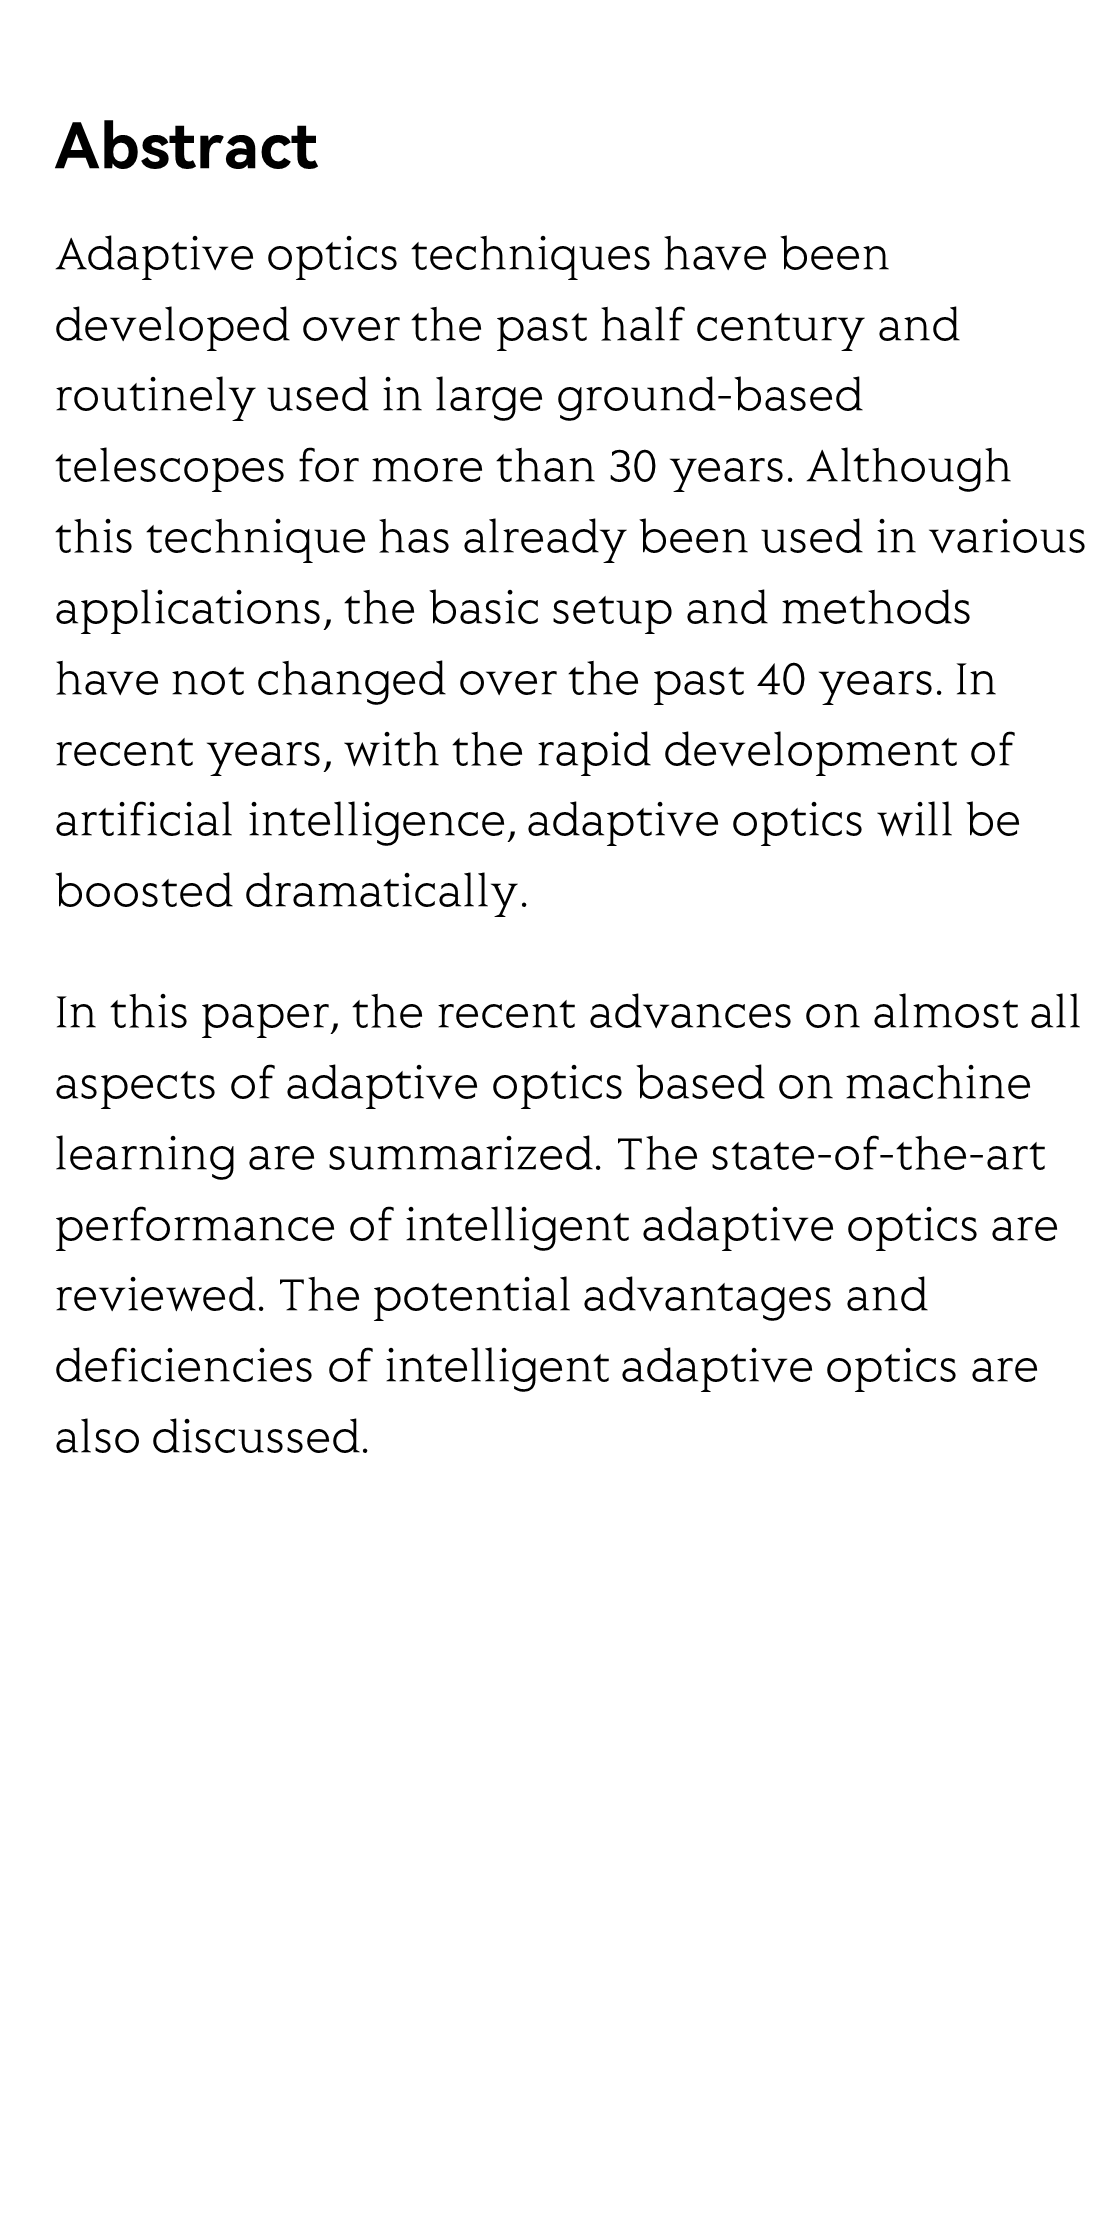 Adaptive optics based on machine learning: a review_2